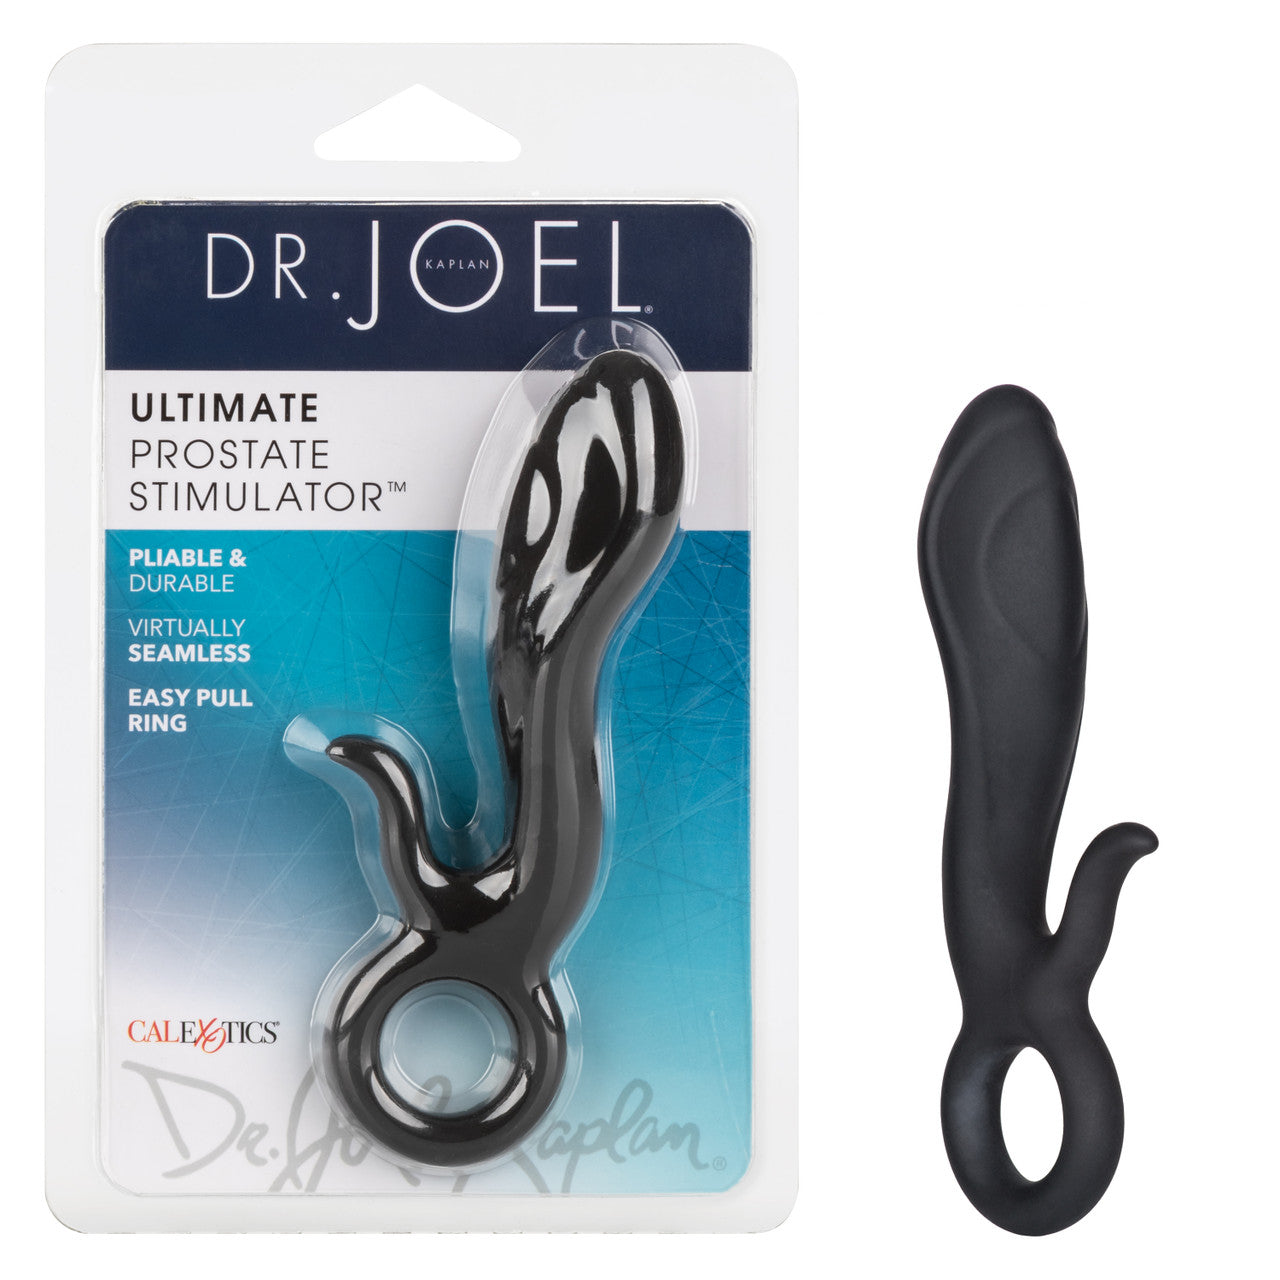 Dr. Joel Kaplan Ultimate Prostate Stimulator - Thorn & Feather Sex Toy Canada